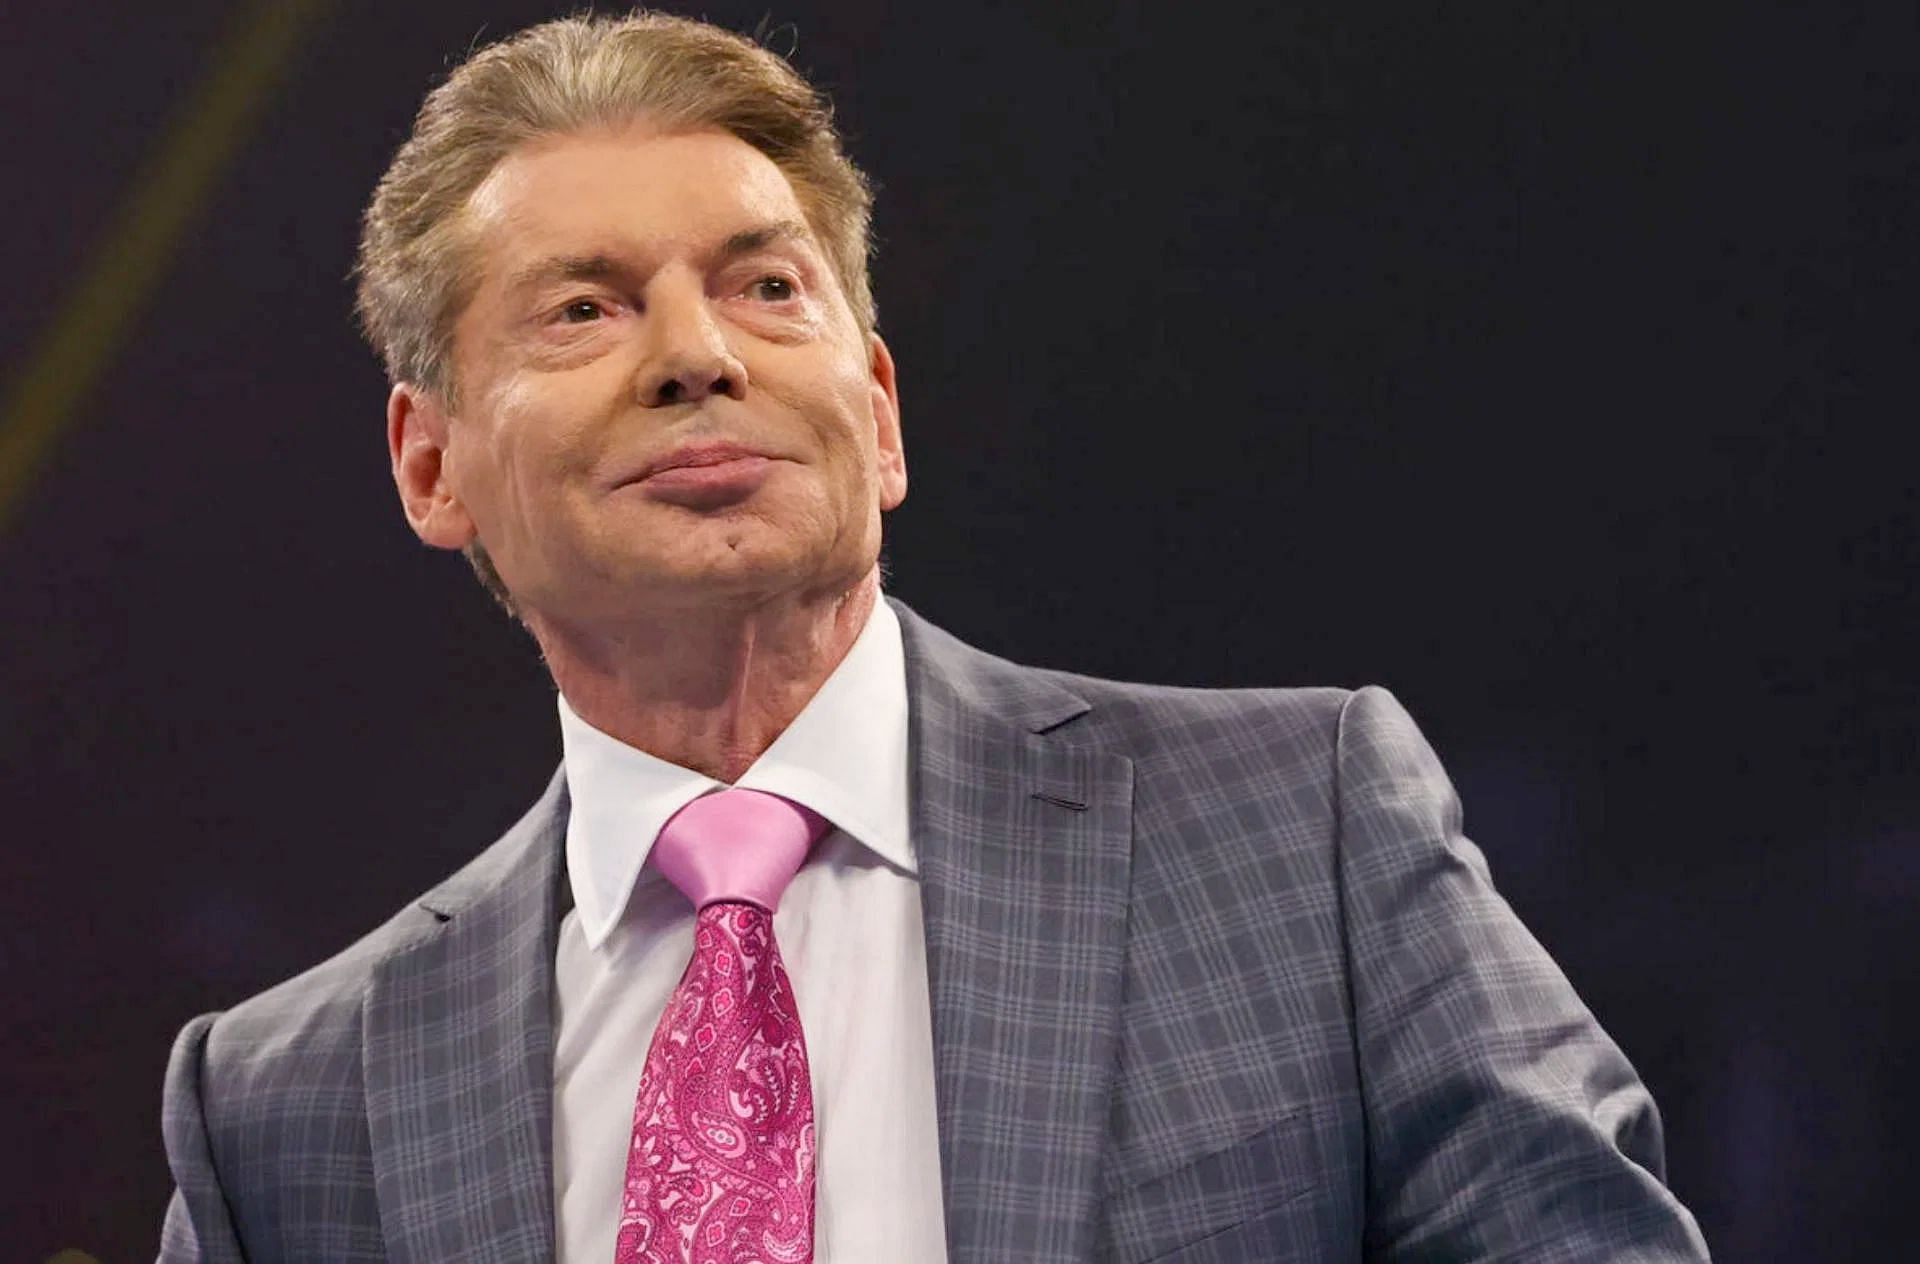 Vince McMahon is back to WWE as the chairman